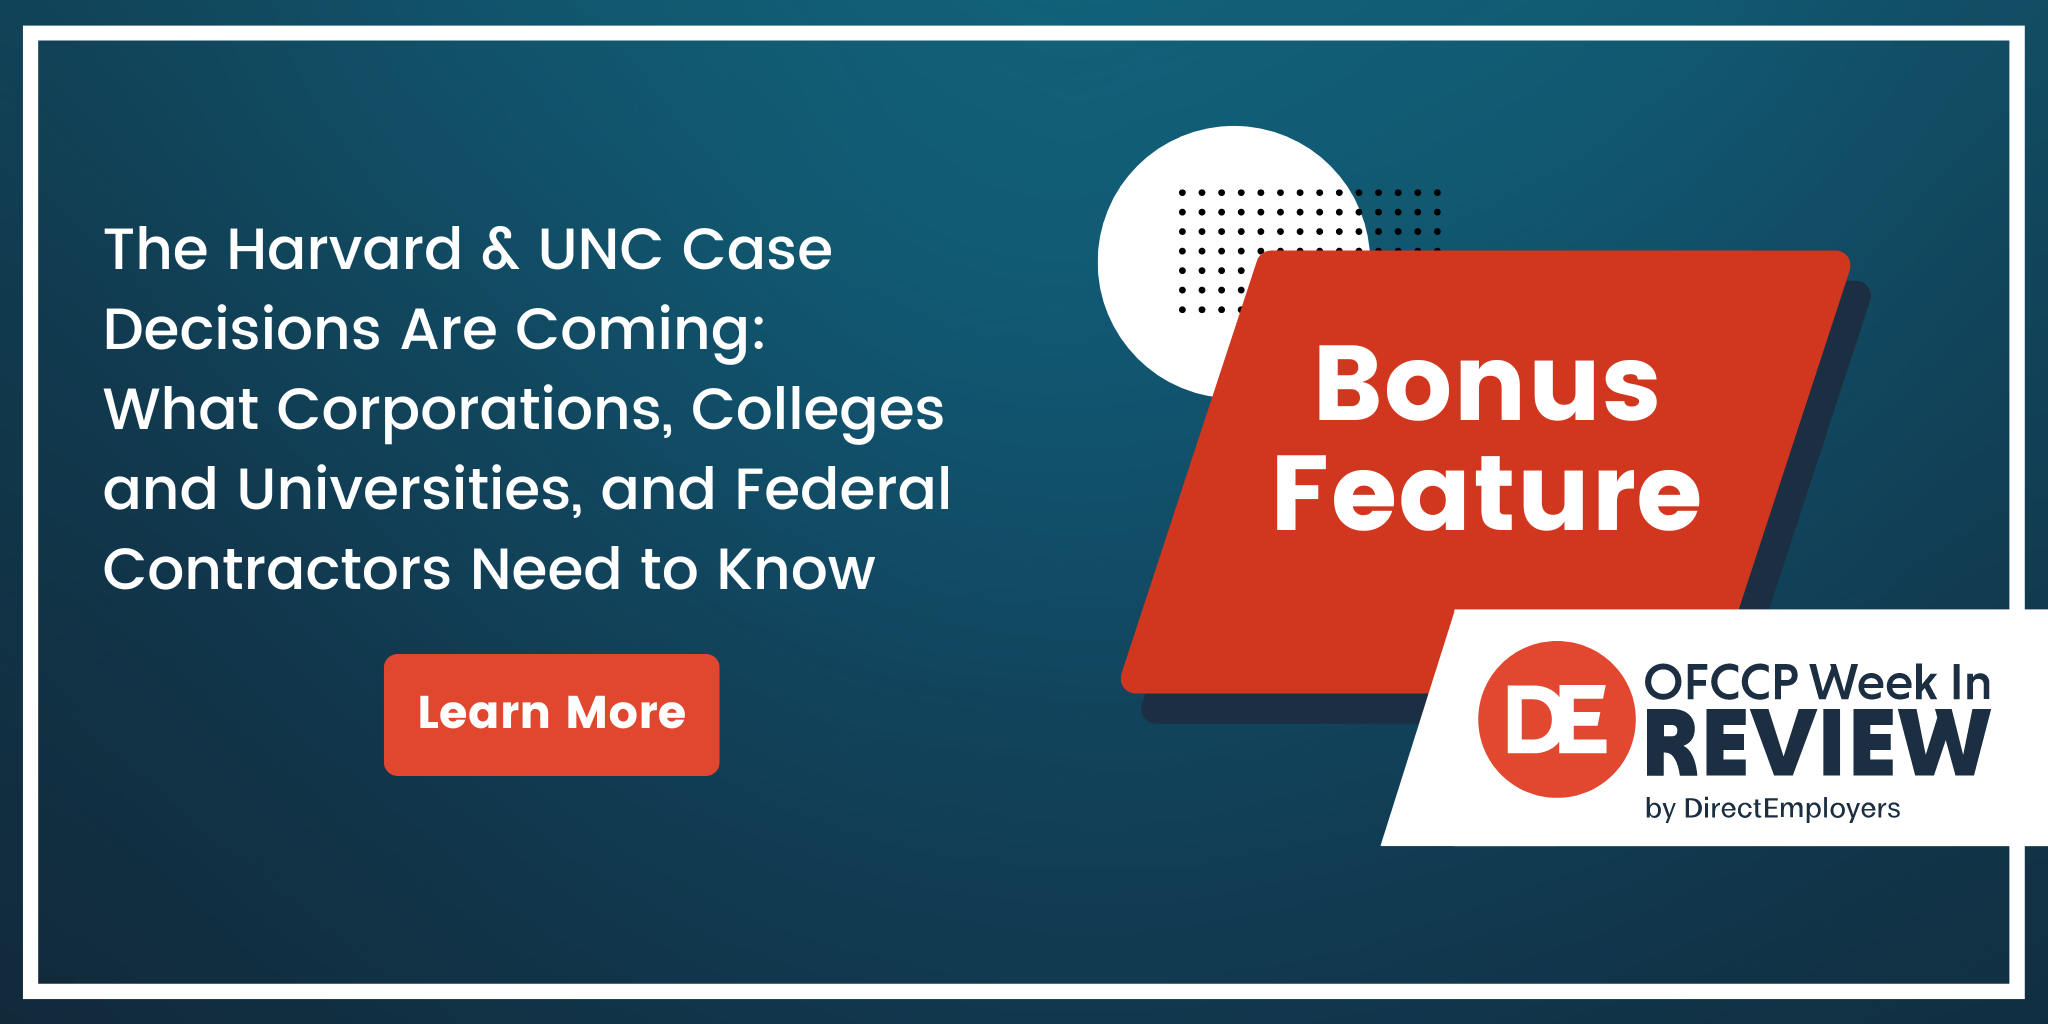 OFCCP Week In Review Bonus Feature | The Harvard and UNC Case Decisions Are Coming: What Corporations, Colleges and Universities, and Federal Contractors Need to Know